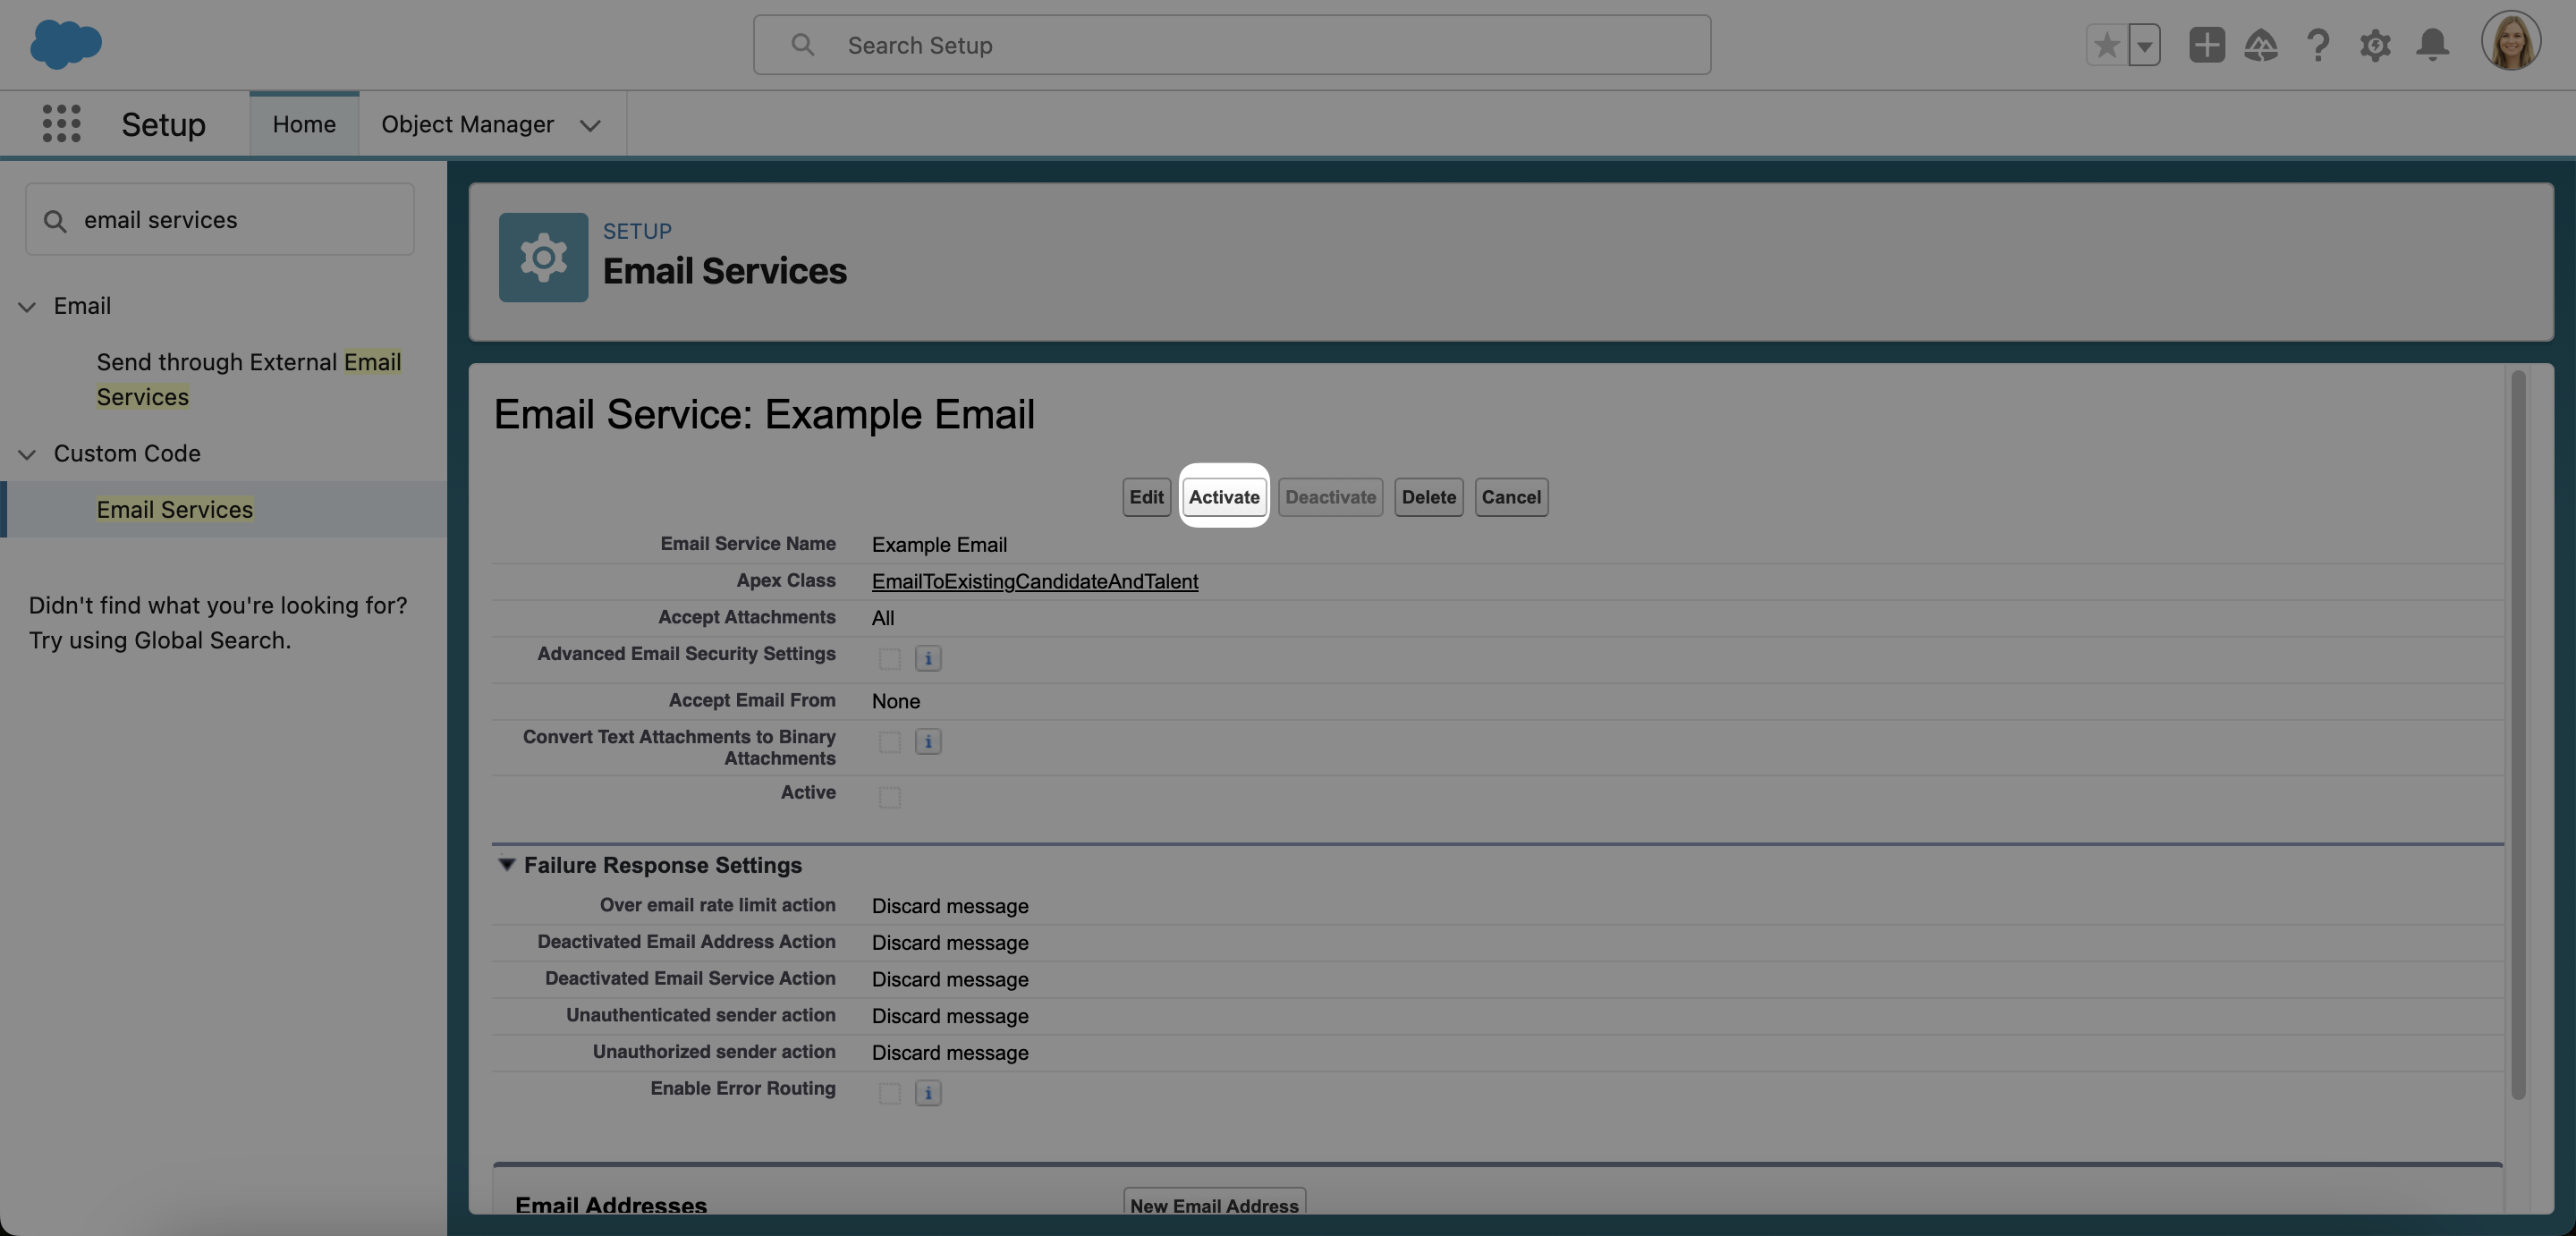 Activating an email service in Salesforce